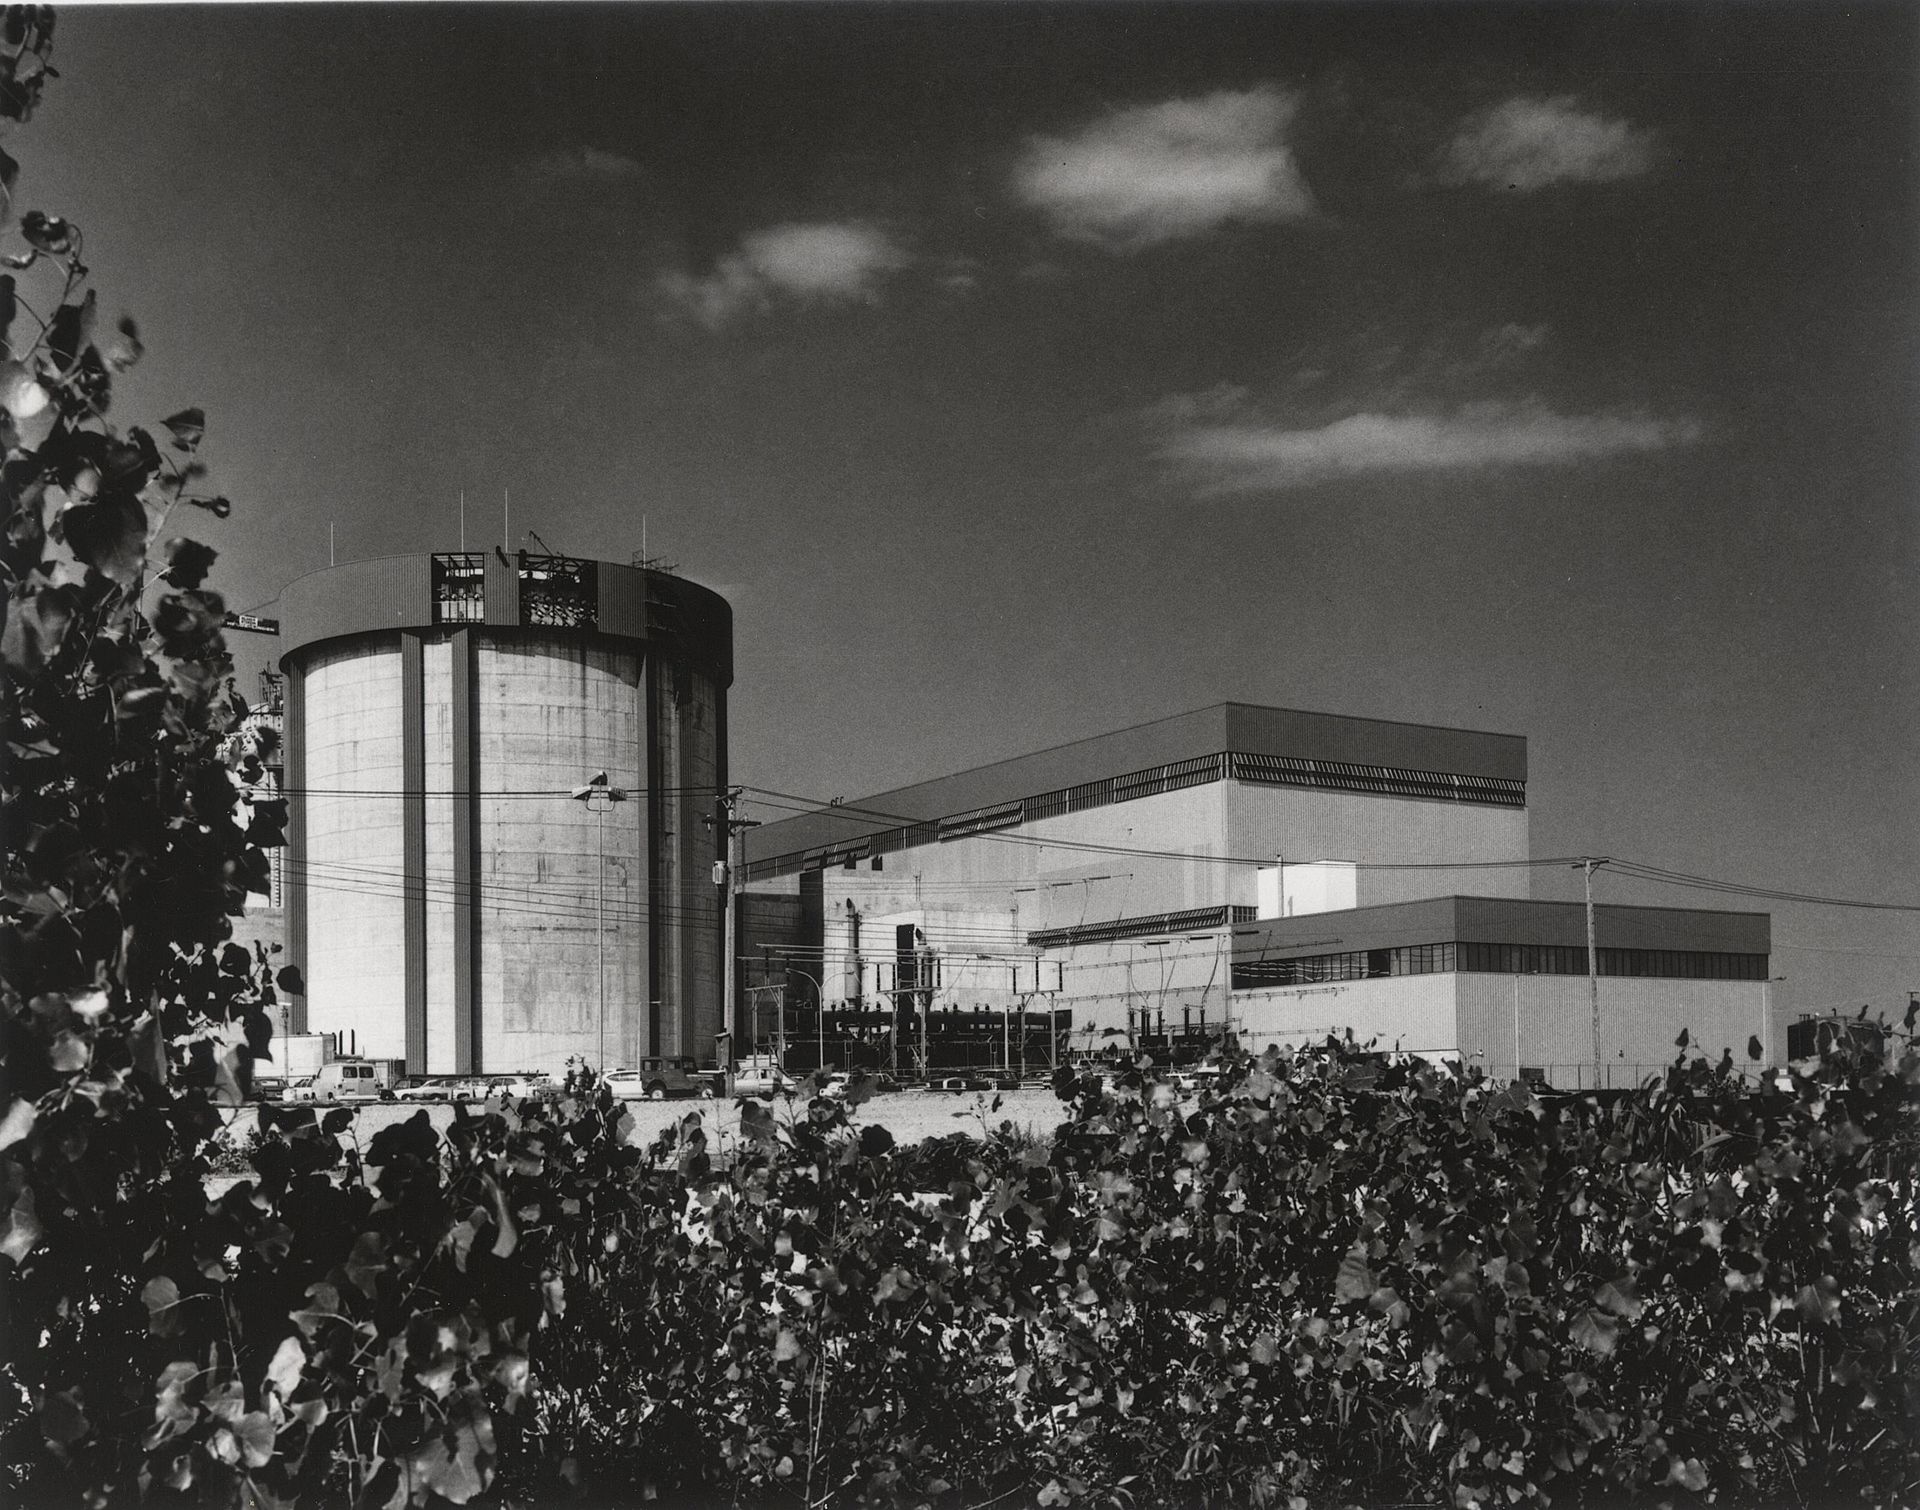 June 1973 – The First 1,000-Megawatt Nuclear Plant Goes into Service (Commonwealth Edison’s Zion Nuclear Power Plant).